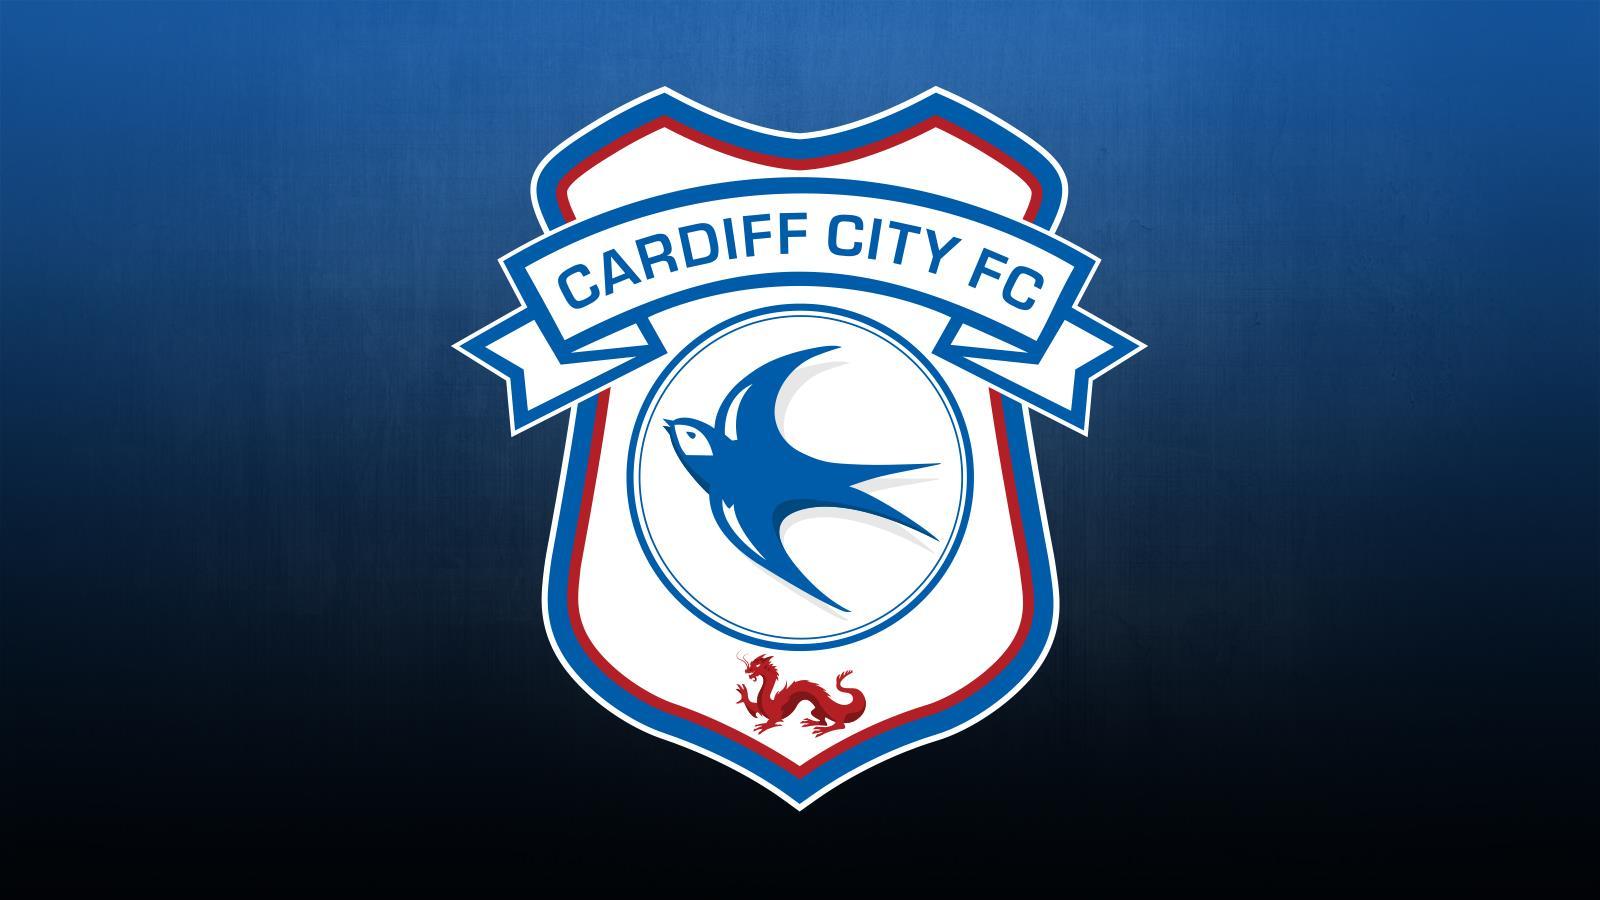 Cardiff City Football Club - Here's a new PC/Mac wallpaper for all # CardiffCity fans. Pullout poster next Weds v Foxes